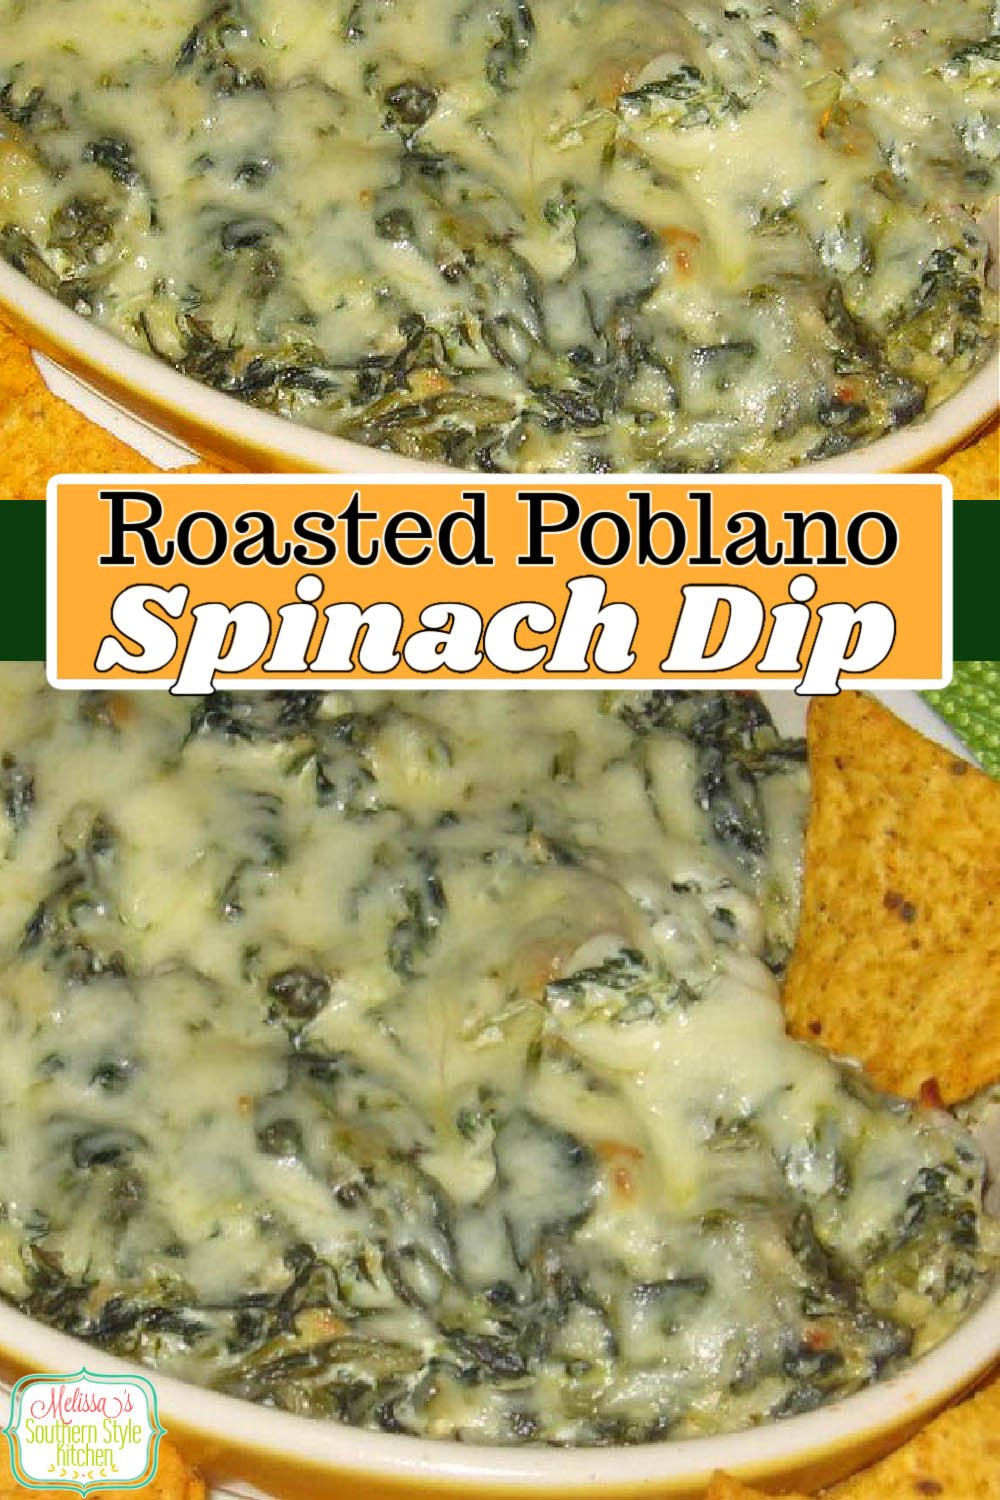 This kickin' Roasted Poblano Spinach Dip is impossible to resist #spinachdip #roastedpoblanos #poblanopeppers #pepperdips #spinachrecipes #apperizers #poblanos #spicydiprecipes via @melissasssk